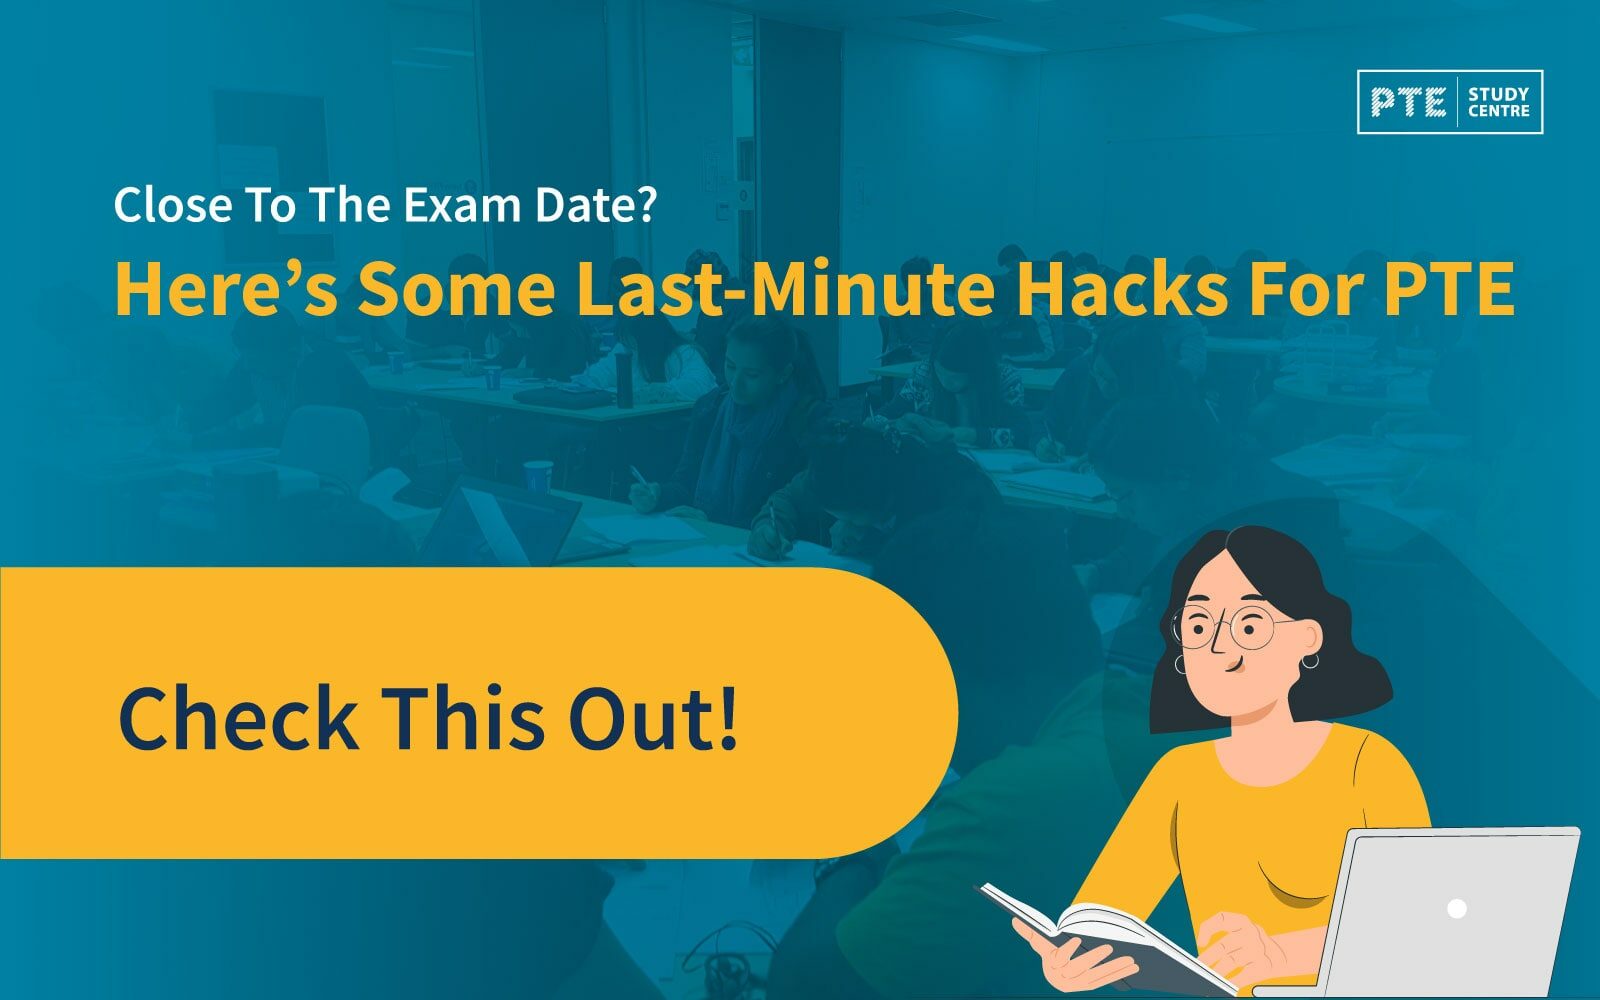 Close To The Exam Date? Here’s Some Last-Minute Hacks For PTE